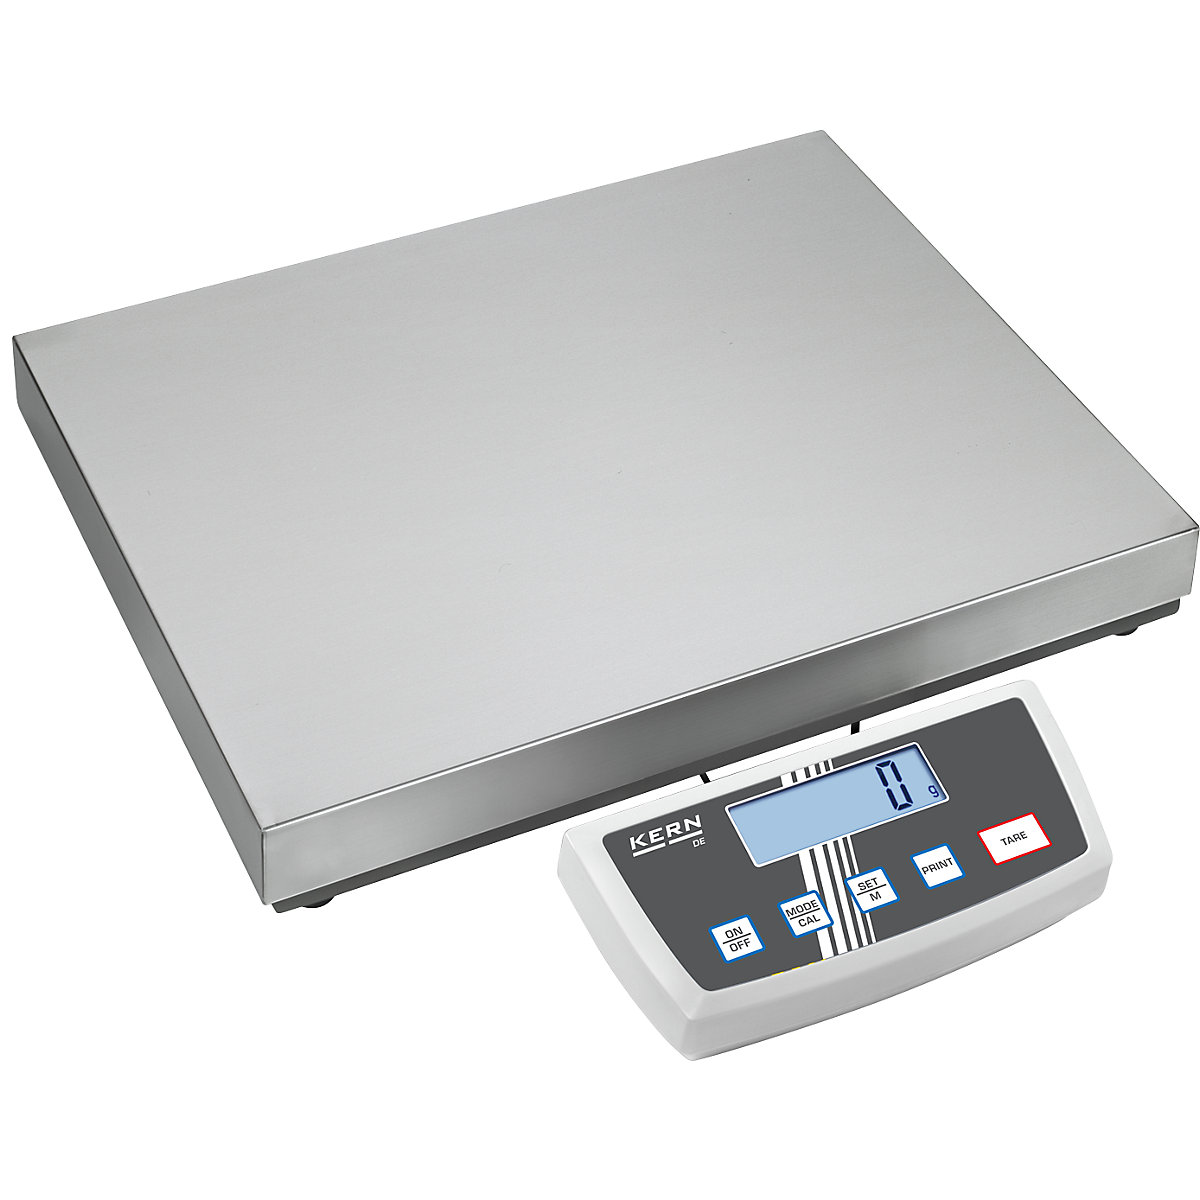 Platform scales – KERN, dual range scales, weighing range up to 60 kg, read-out accuracy 10 / 20 g, weighing plate 522 x 403 mm-1